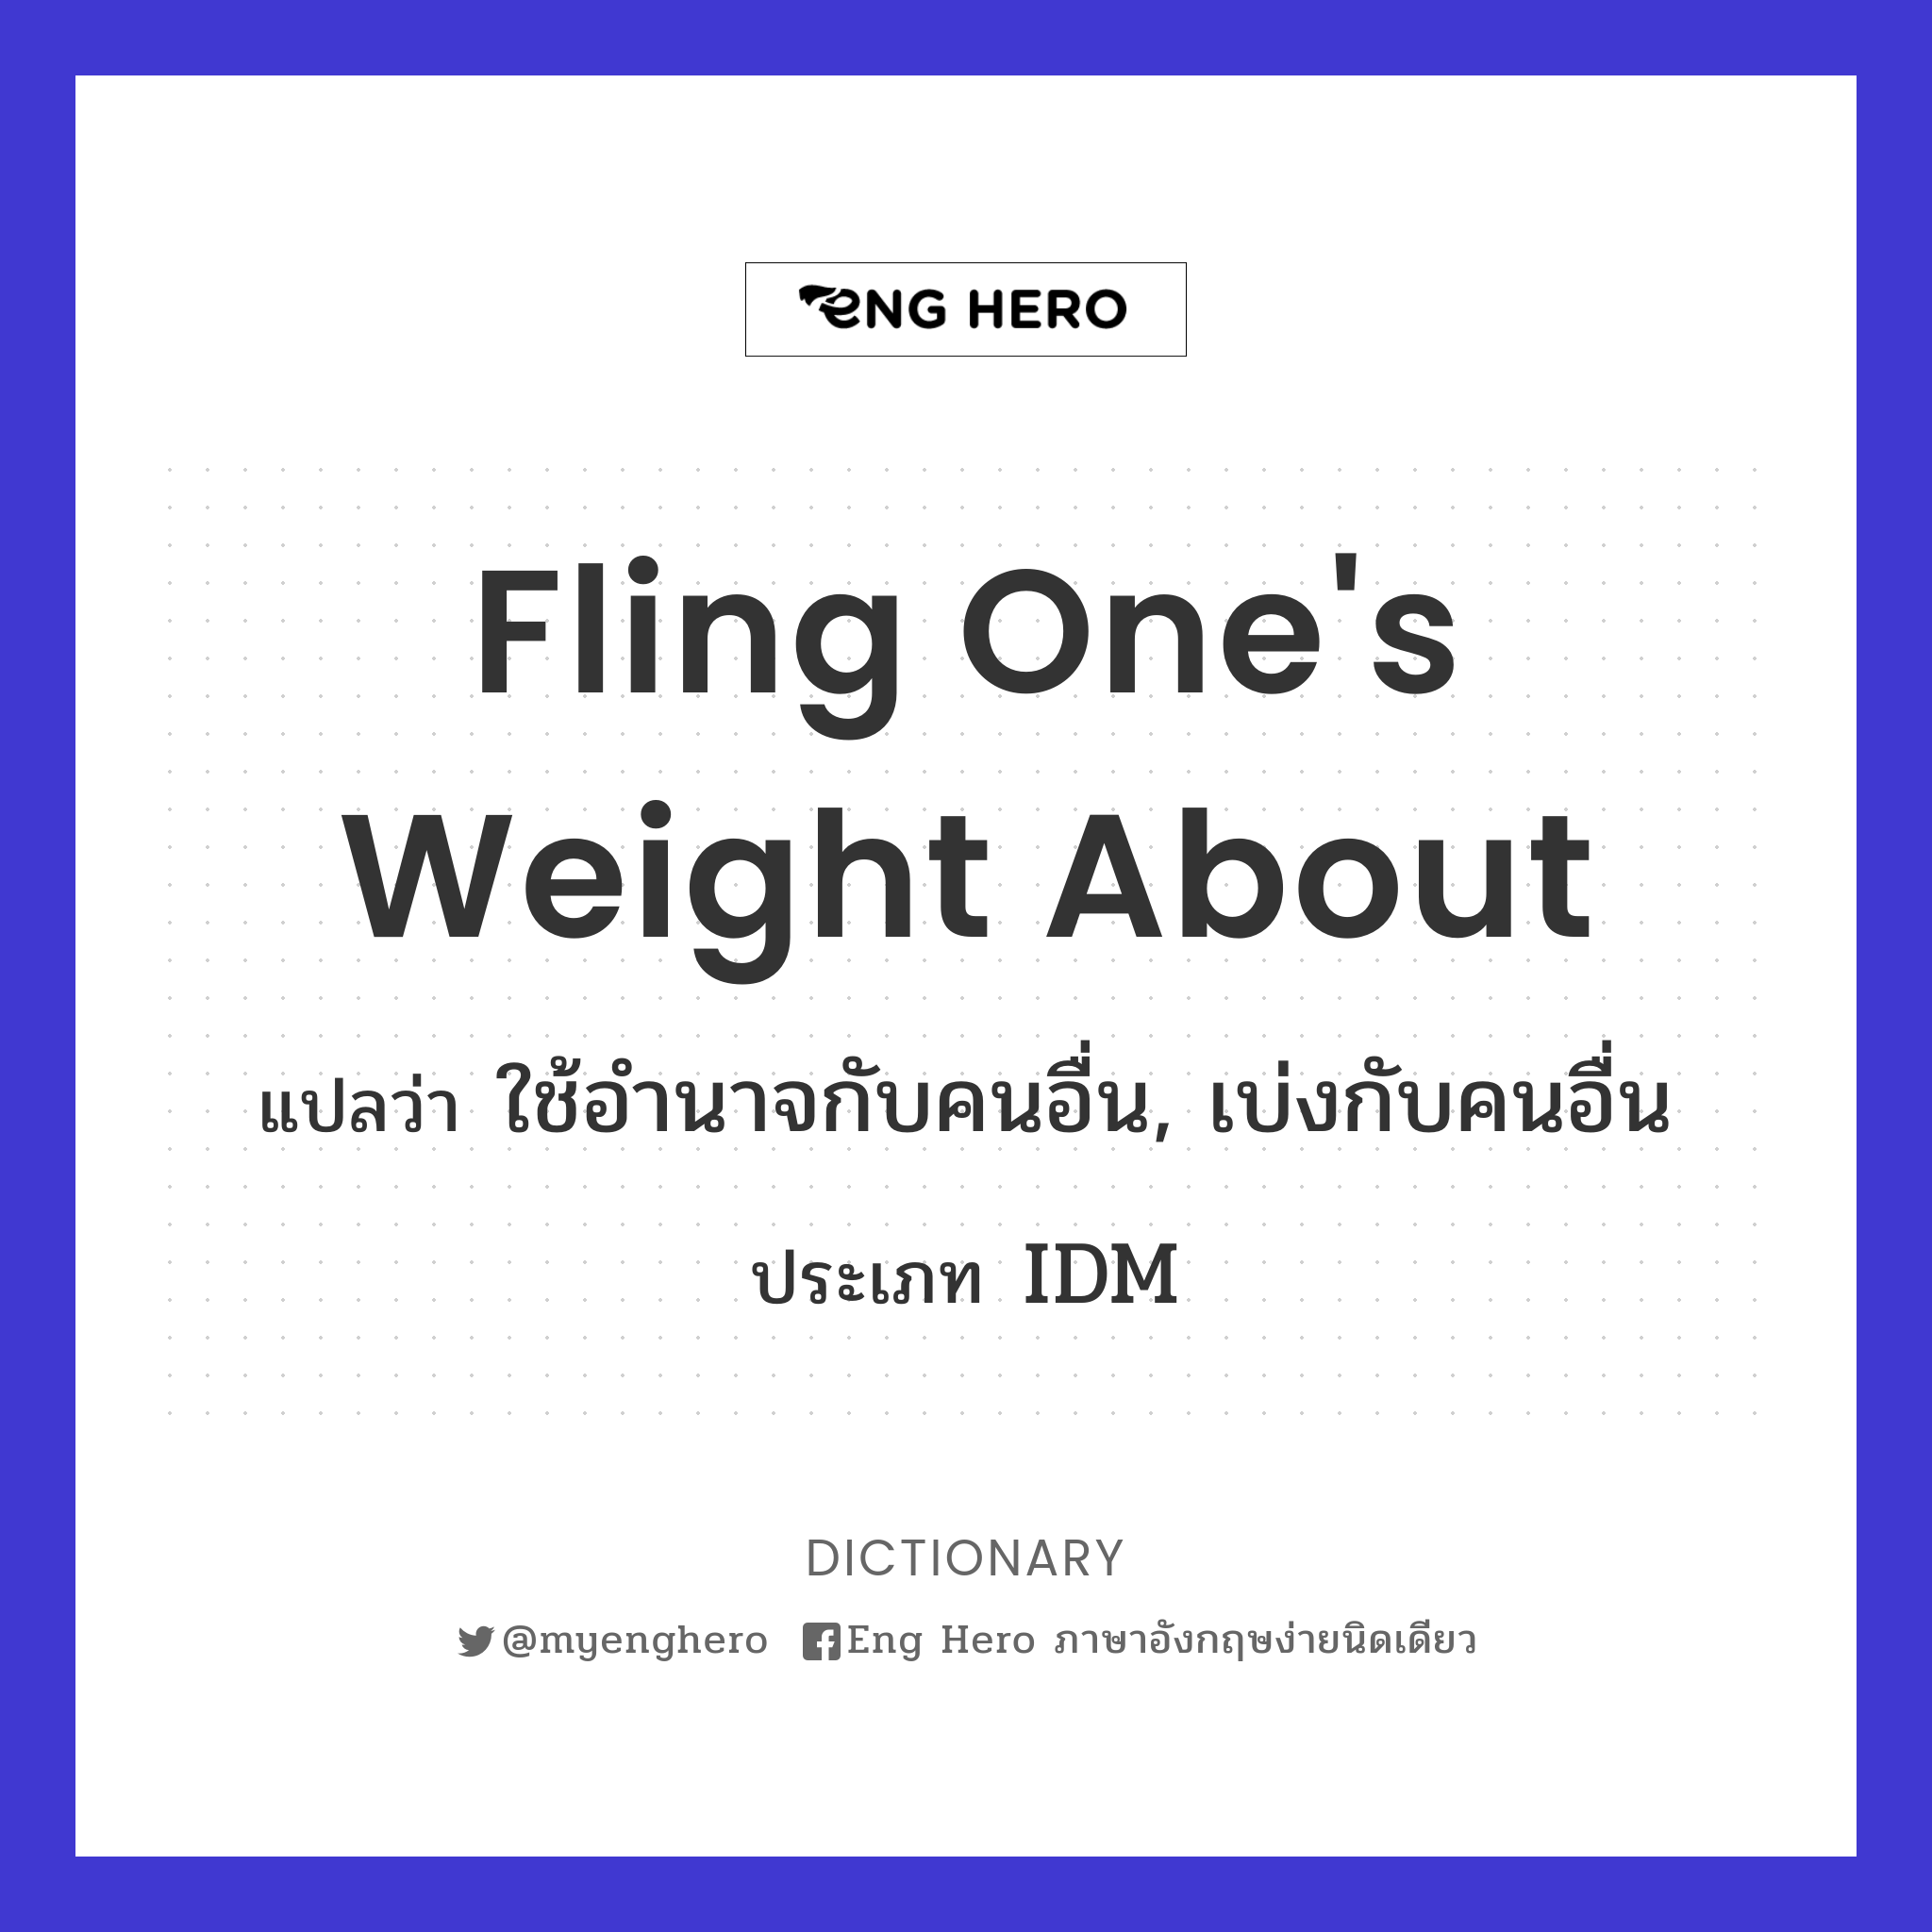 fling one's weight about